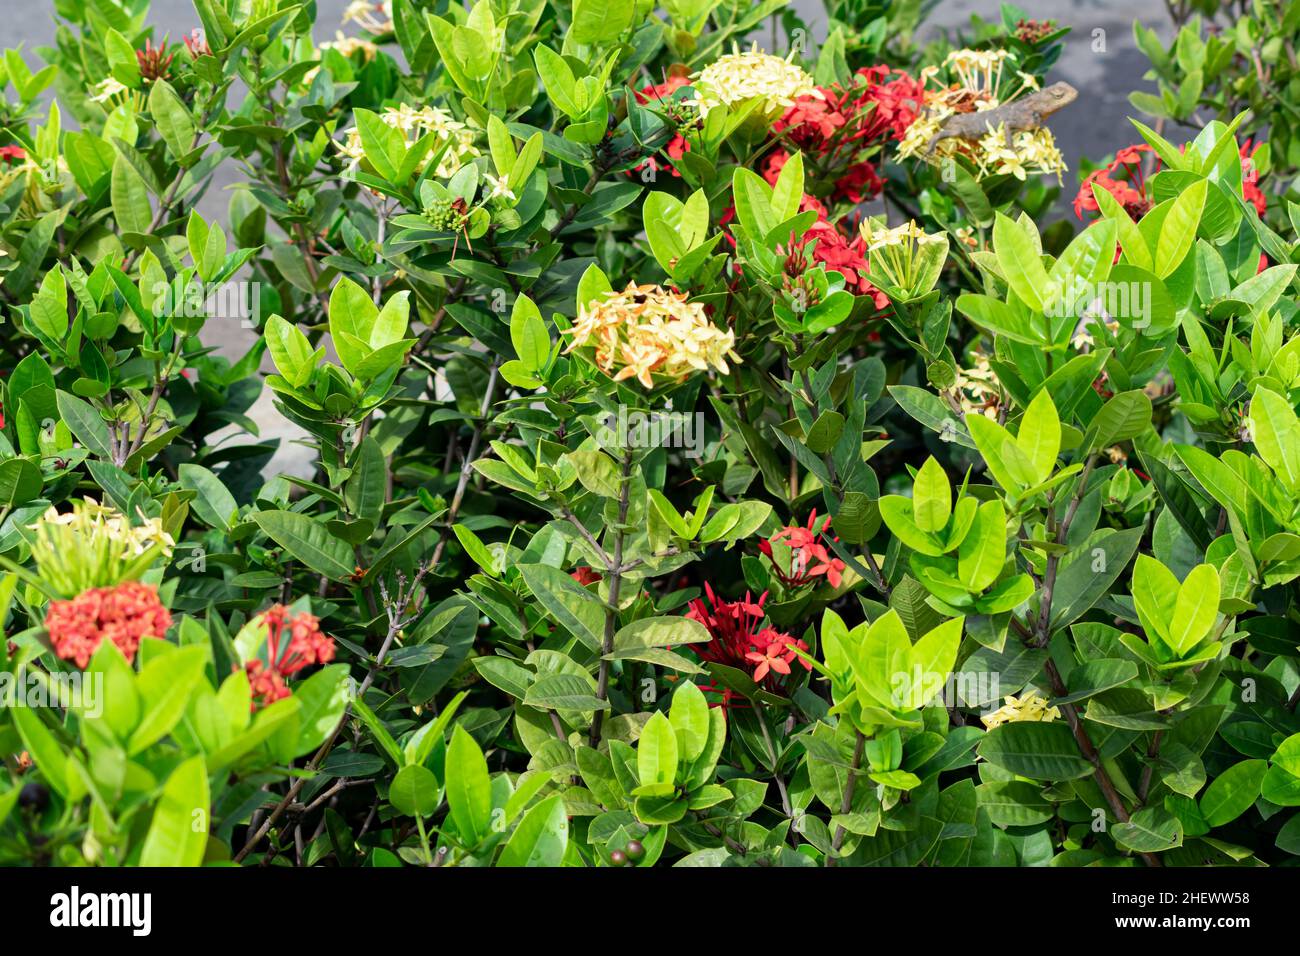 Yellow and red ixora flowers blooming on the green plant at city park Stock Photo